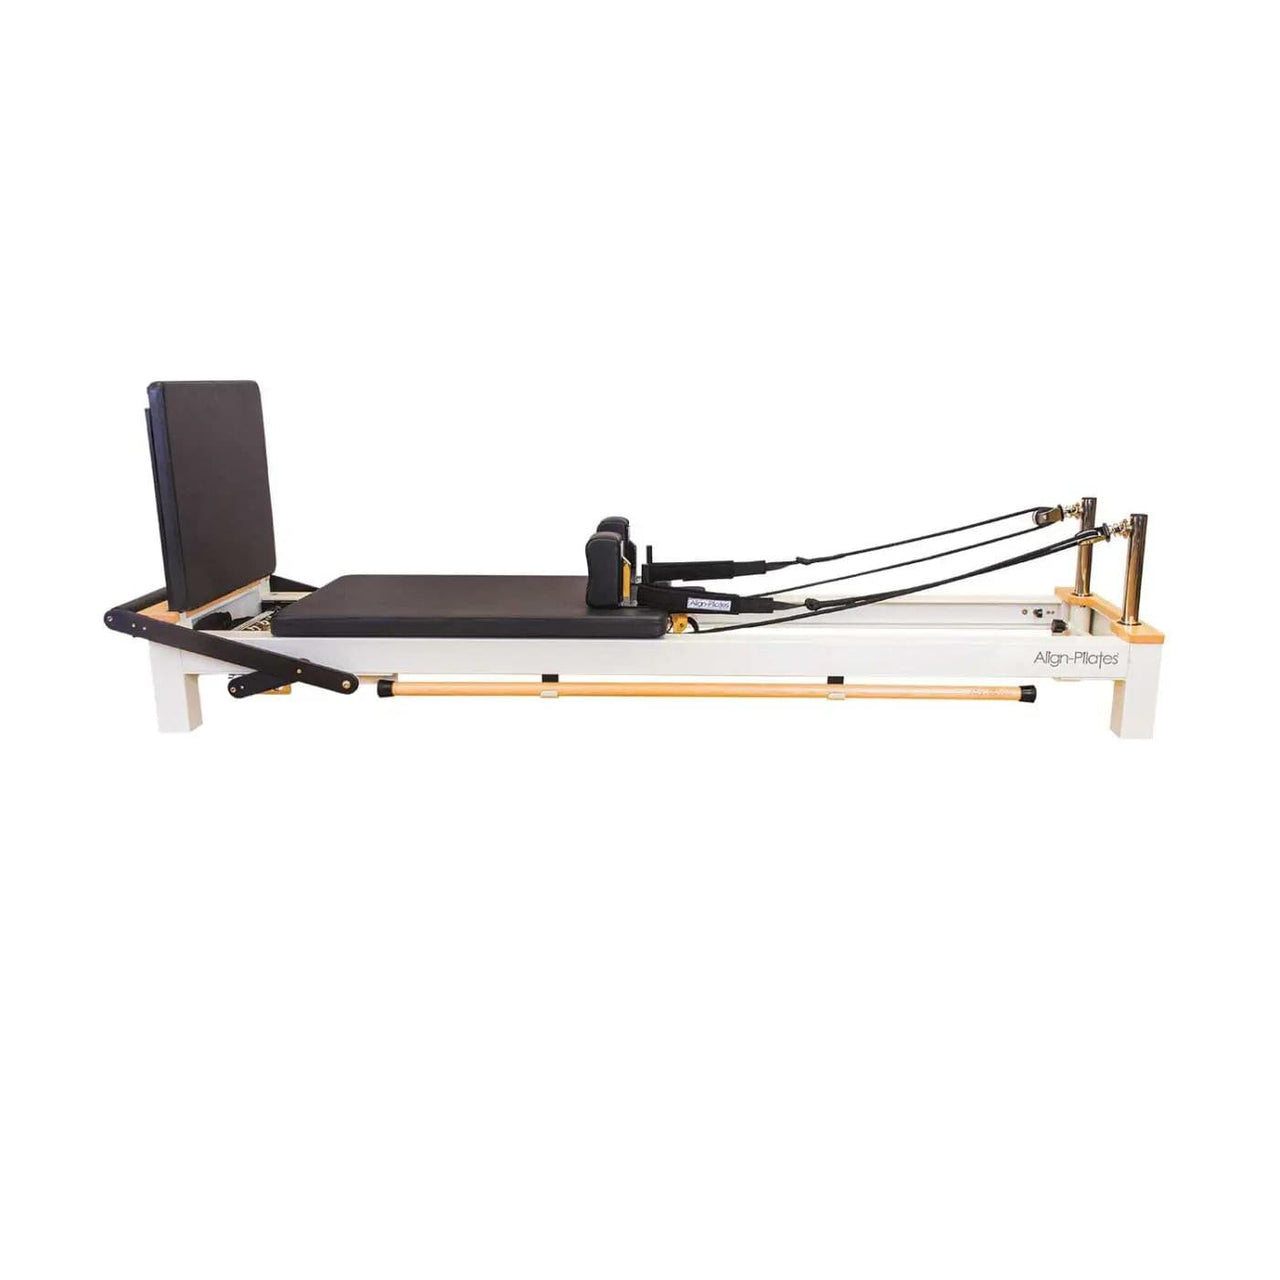 ALIGN-PILATES® C8-S Reformer with Tower Bundle - LUXUSFIT Luxury Exercise & Recovery Equipment